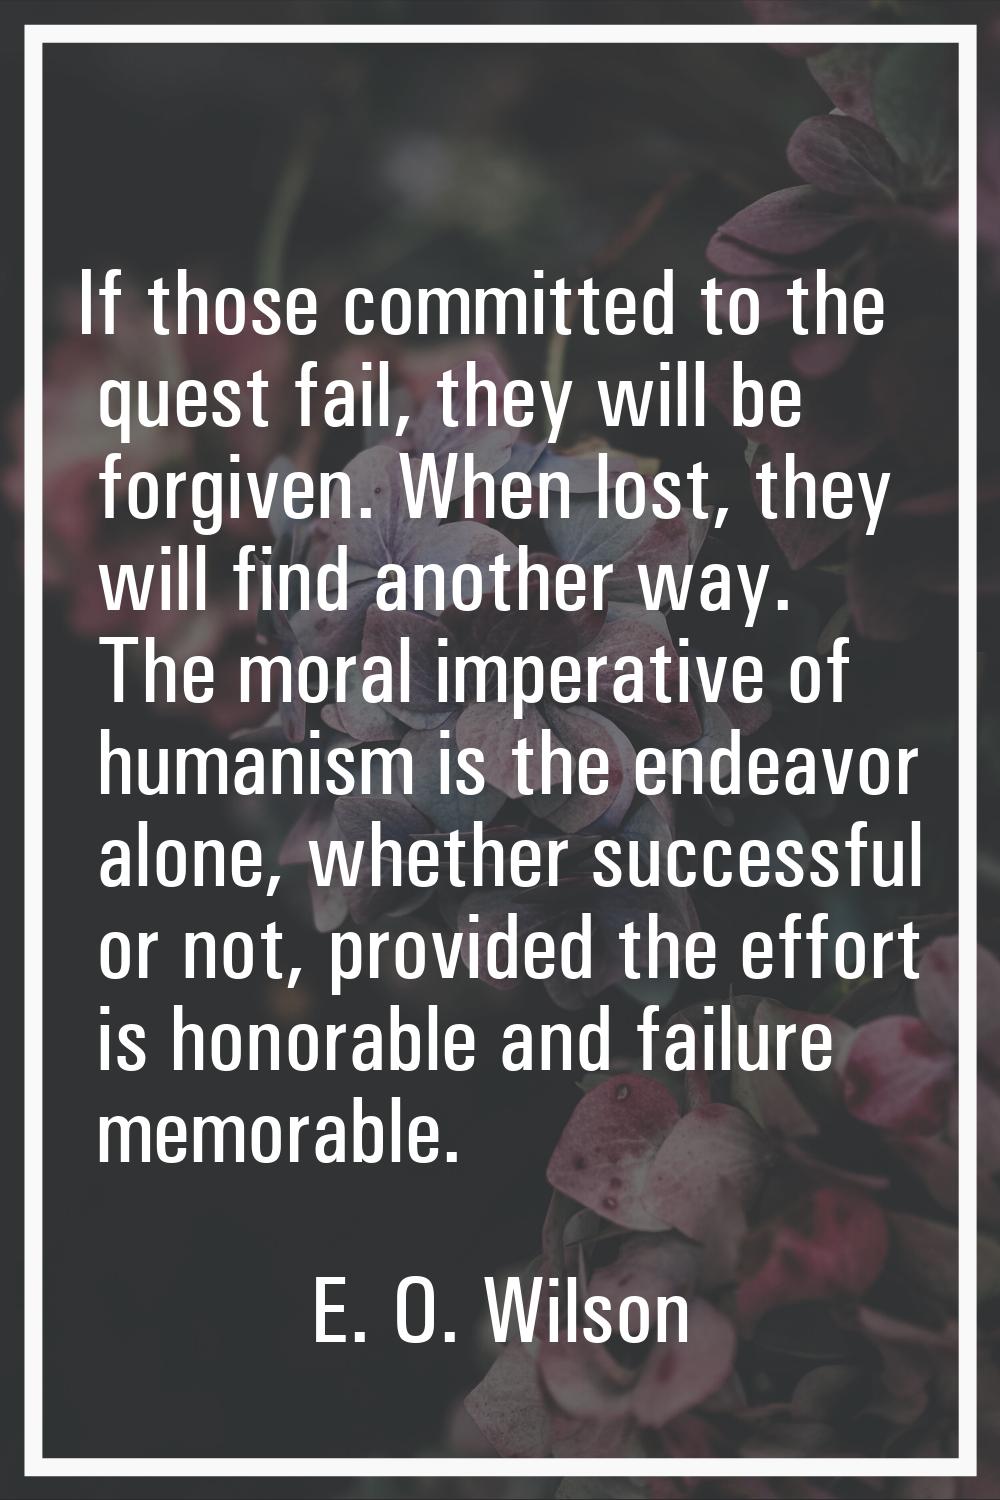 If those committed to the quest fail, they will be forgiven. When lost, they will find another way.